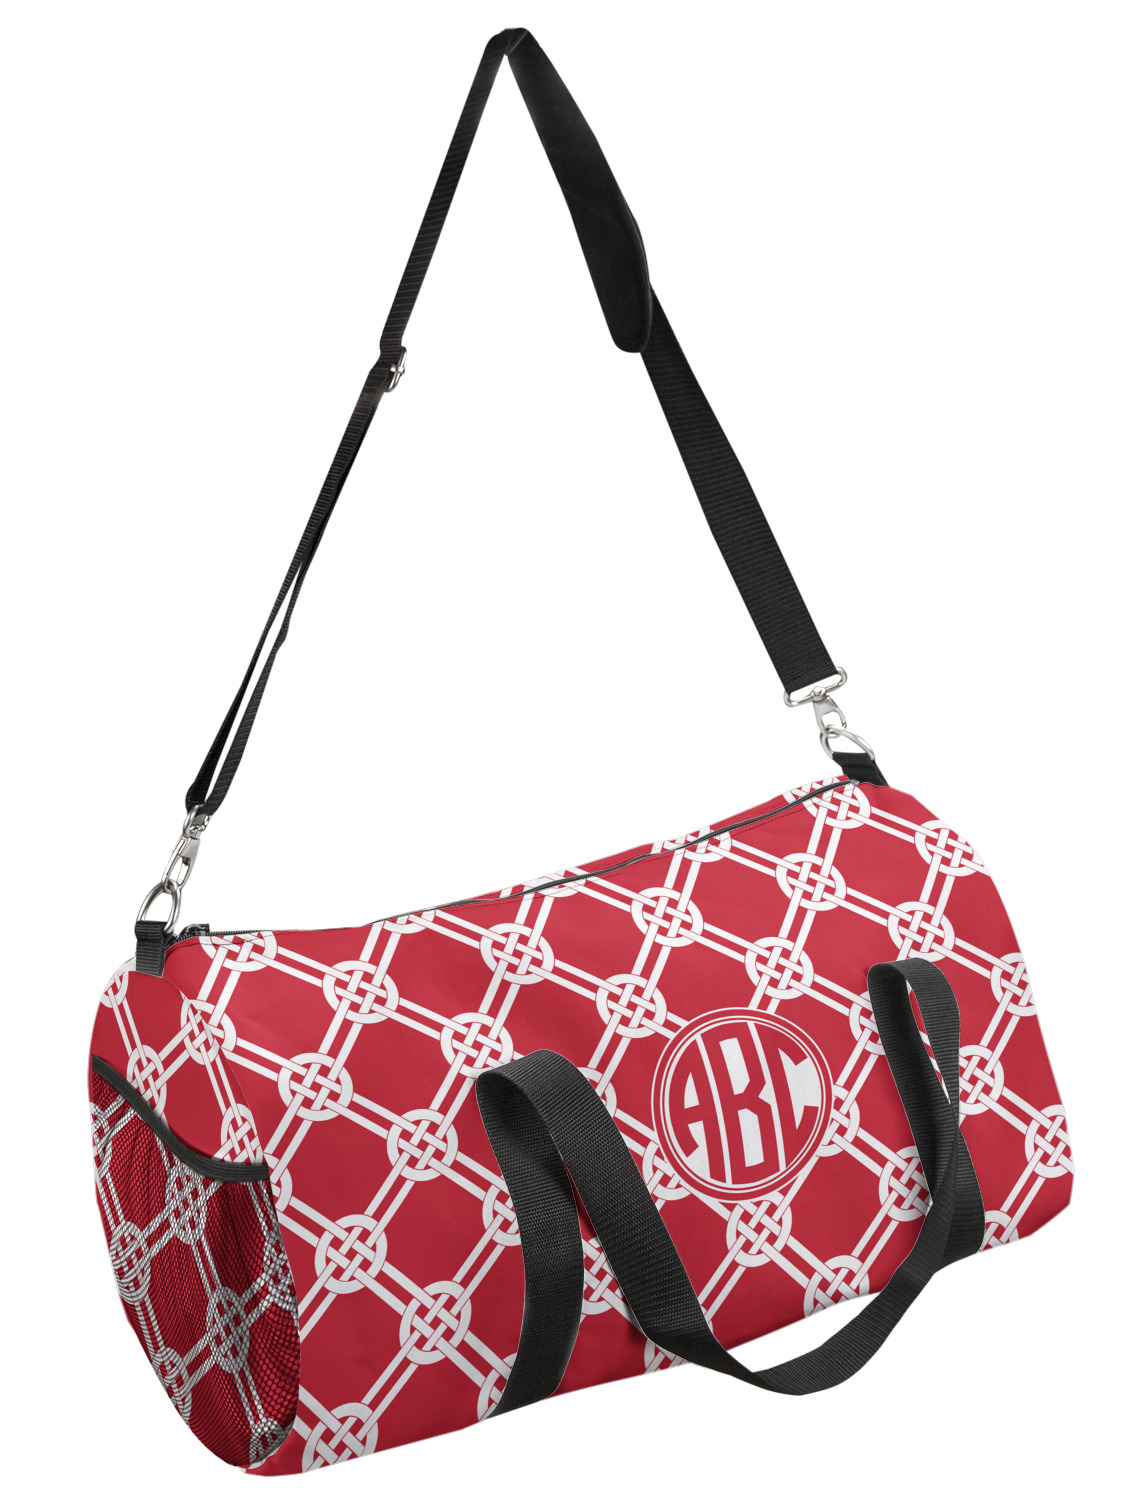 Personalized YouCustomizeIt Celtic Knot Duffel Bag